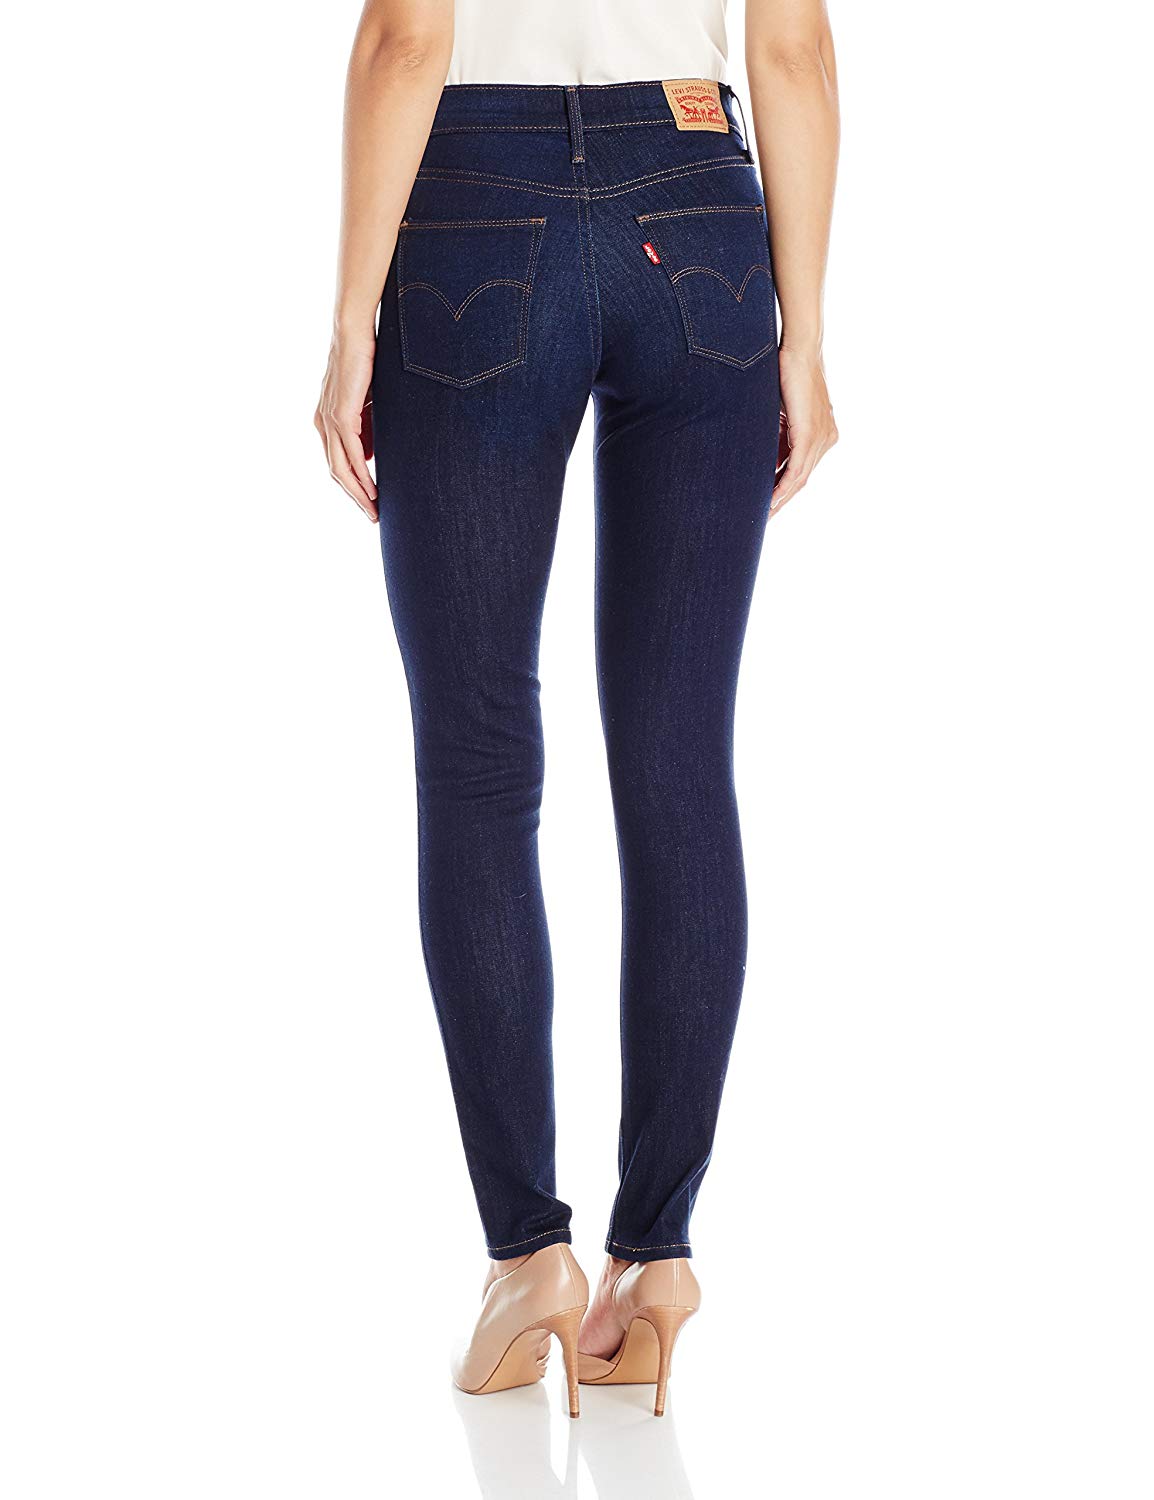 Levi's Women's Slimming Skinny Jeans,, Underwater Canyon, Size 33 ...